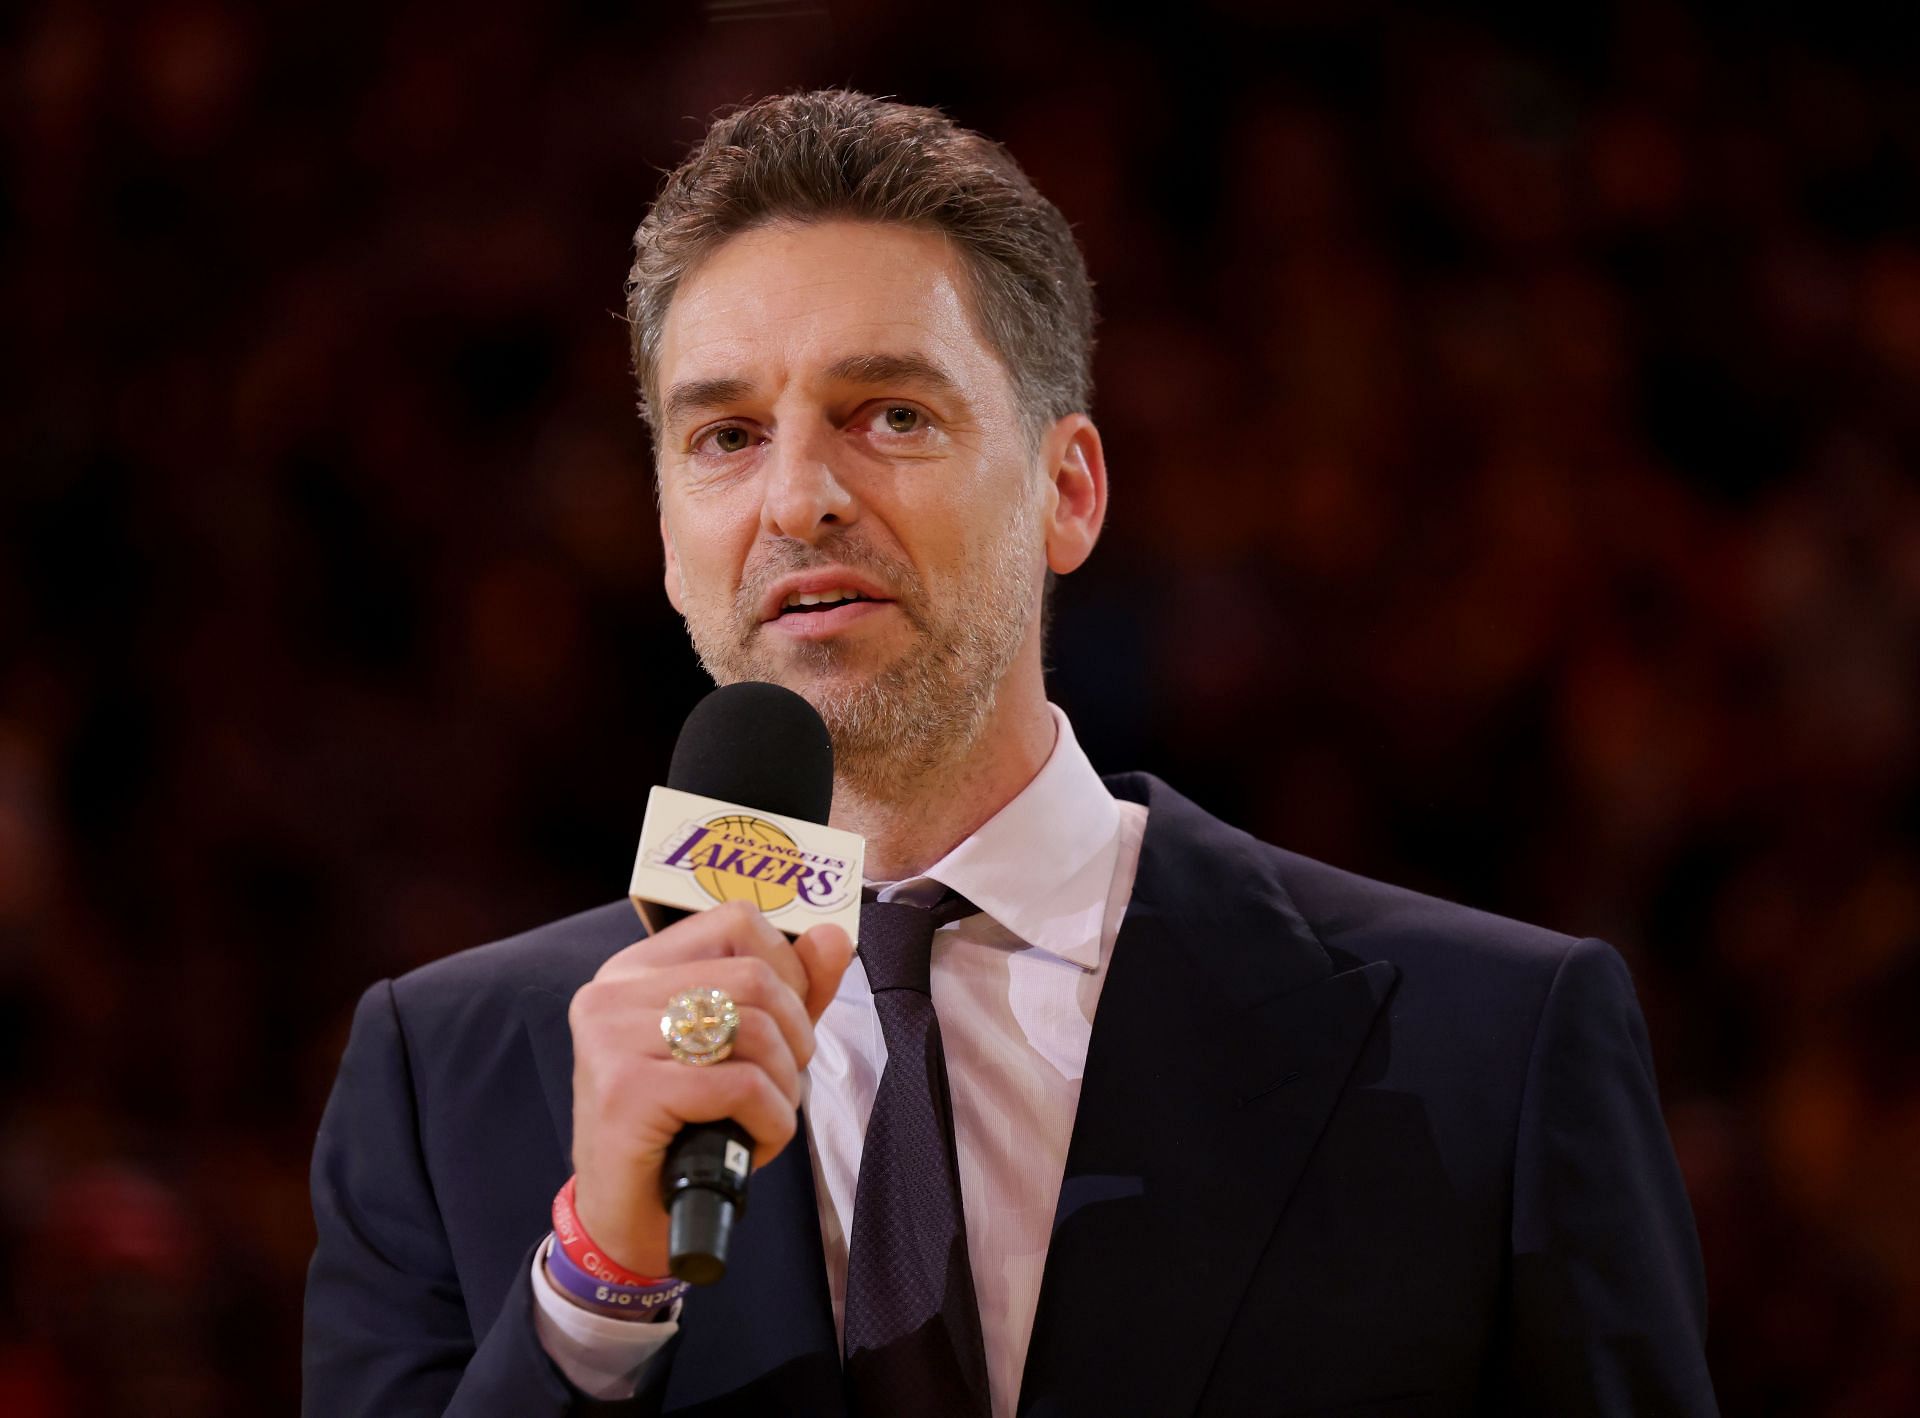 Lakers retire Pau Gasol's No. 16 jersey during halftime ceremony